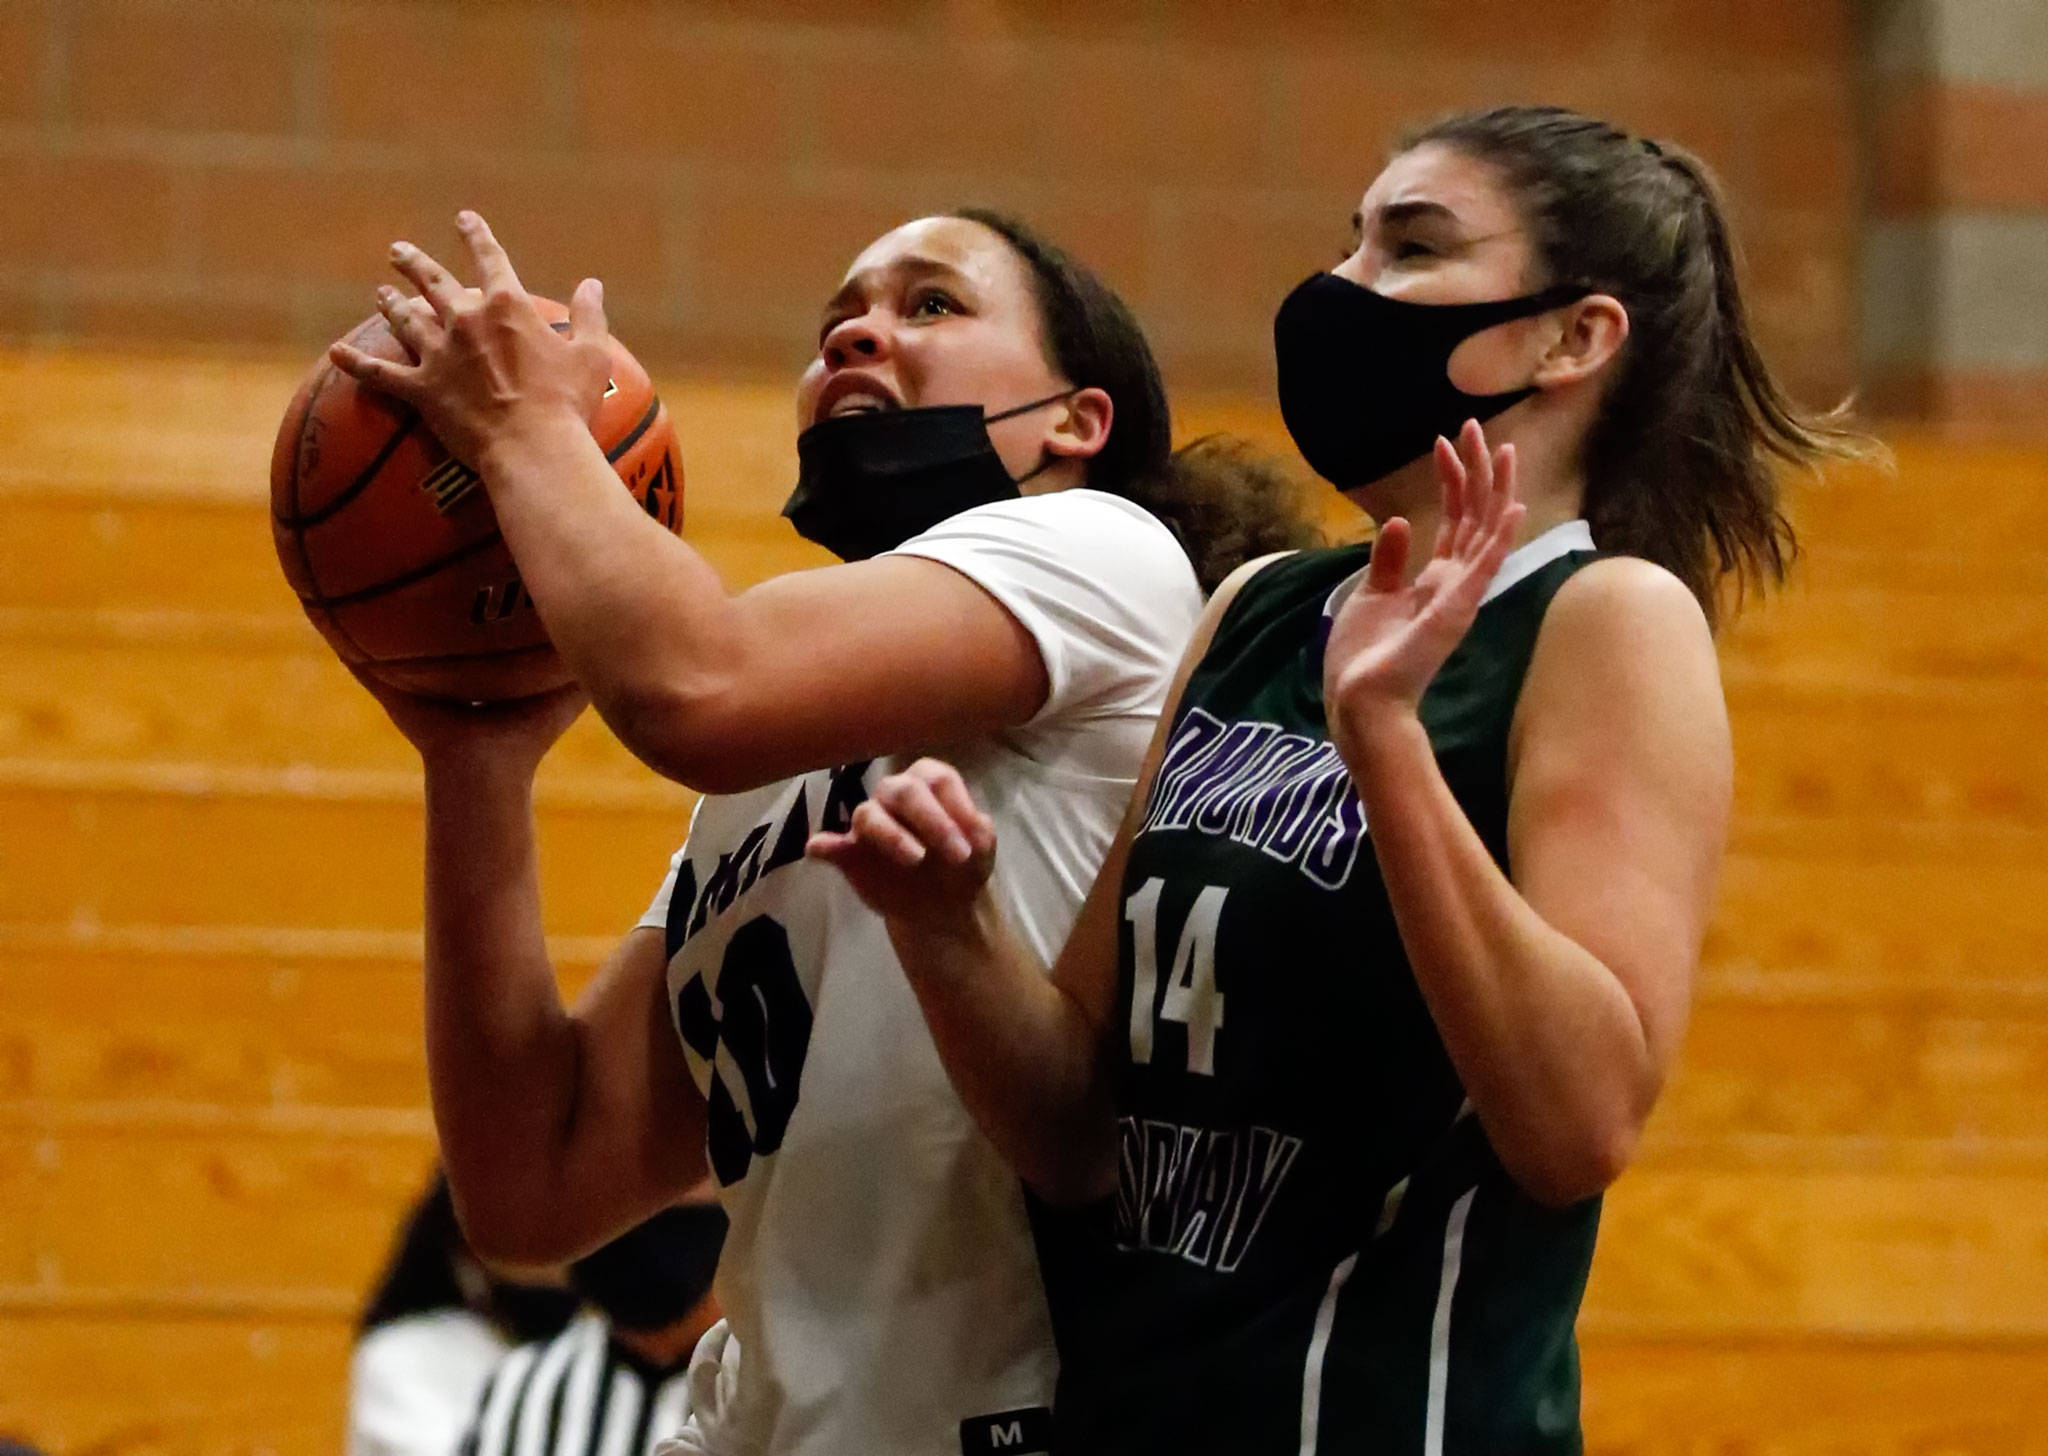 Kamiak’s Nayella George (left) drives the lane with Edmonds-Woodway’s Melanie Walsh defending during a game on May 14, 2021, at Kamiak High School in Mukilteo. (Kevin Clark / The Herald)